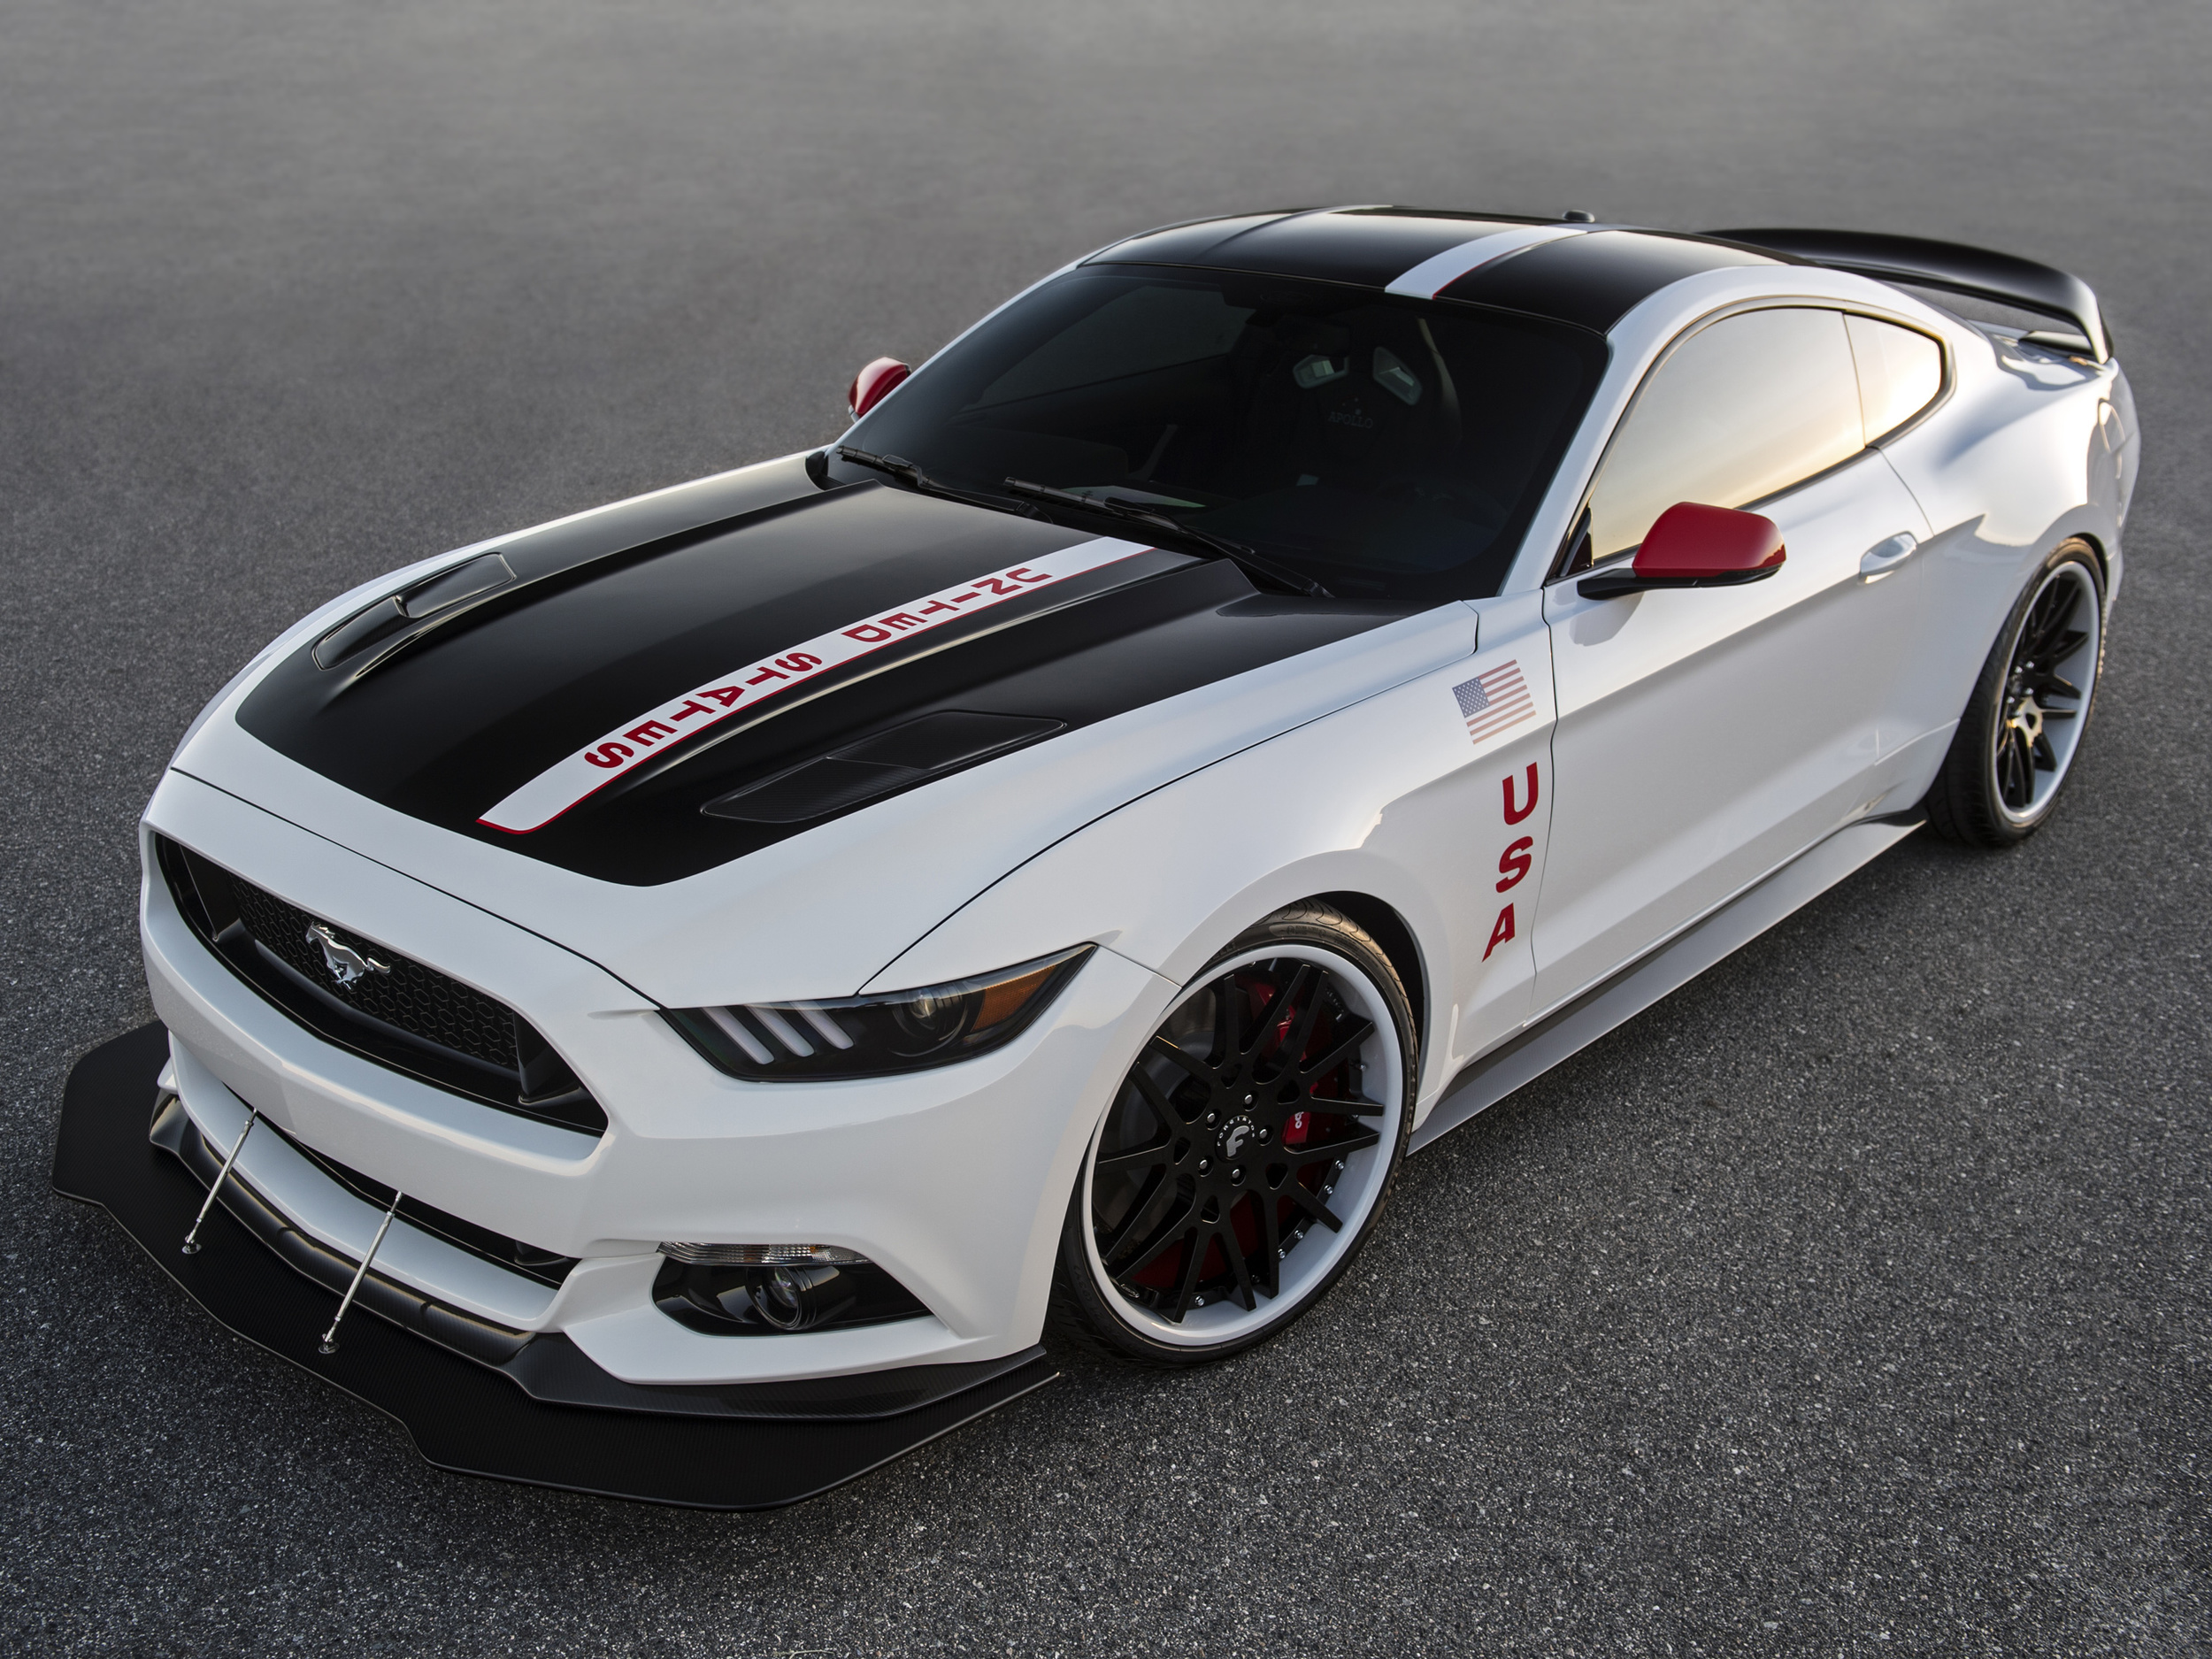 Ford Apollo Edition Mustang up for auction